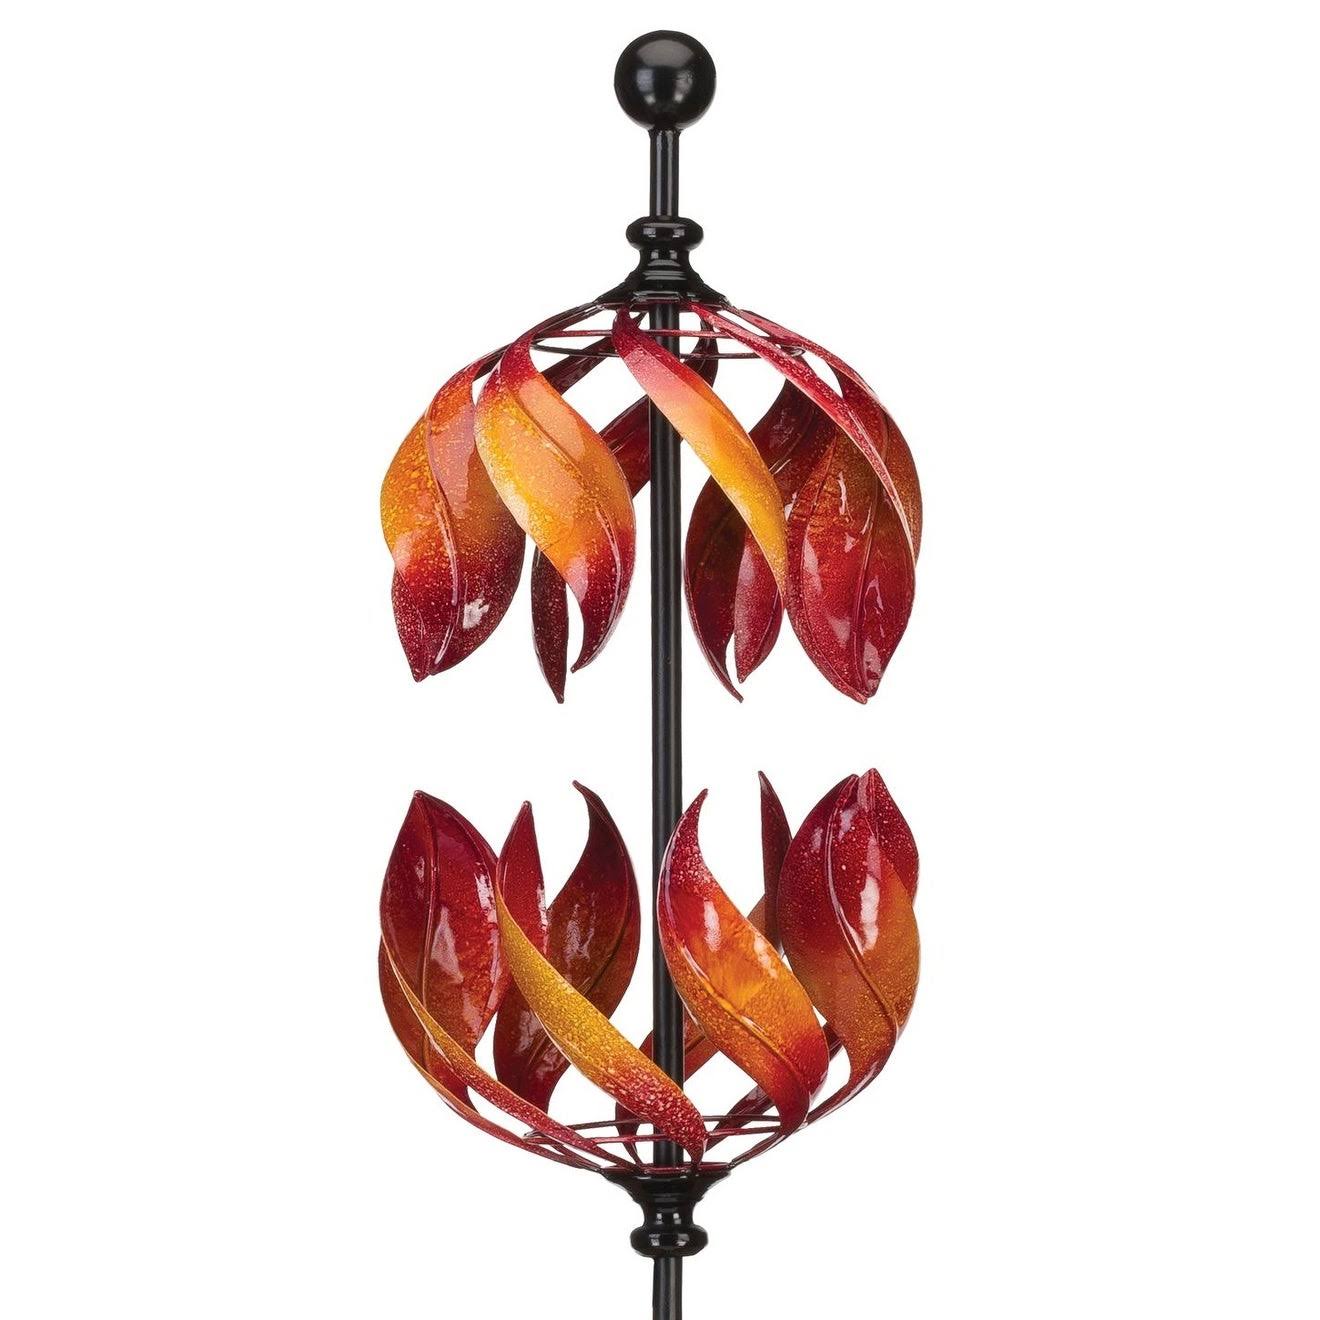 Regal Art & Gift Orange & Red Flame Kinetic Garden Stake One-Size